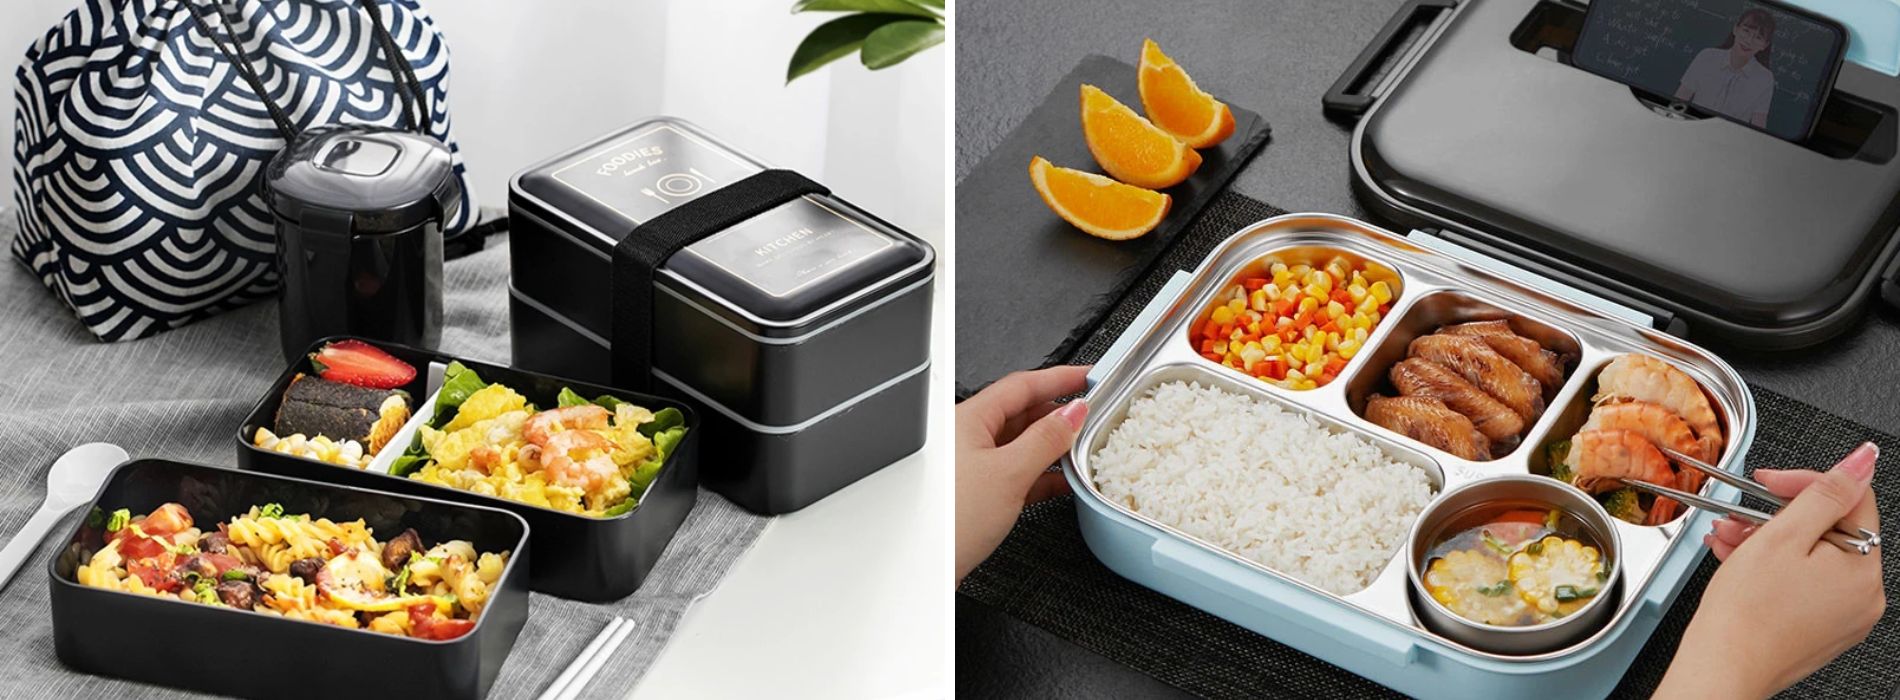 Tupperware lunch box: Stylish and practical solution for meal